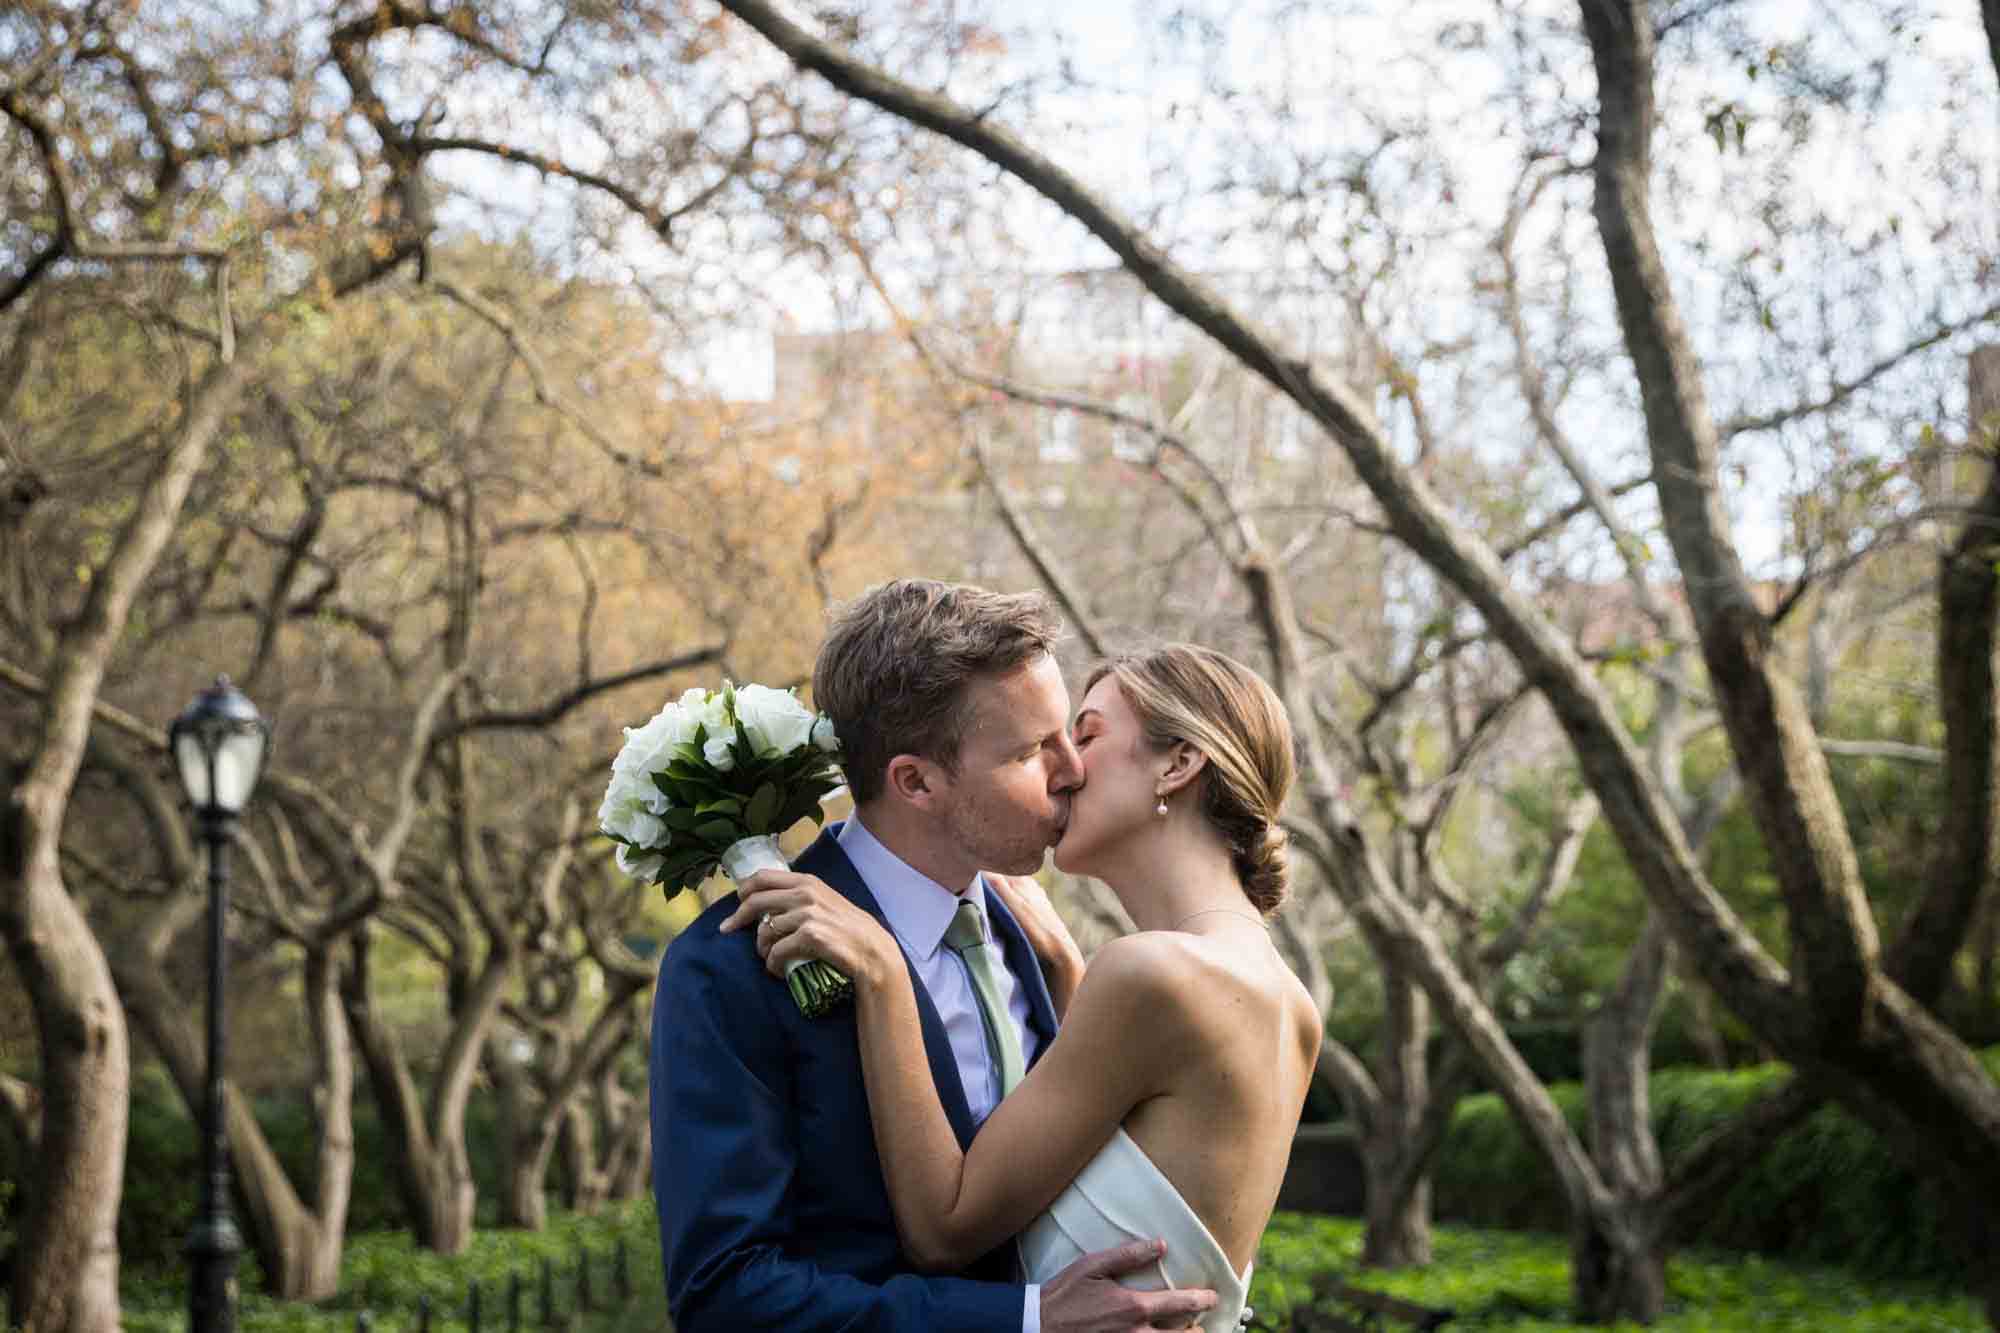 Conservatory Garden wedding photos of bride and groom kissing under tree branches